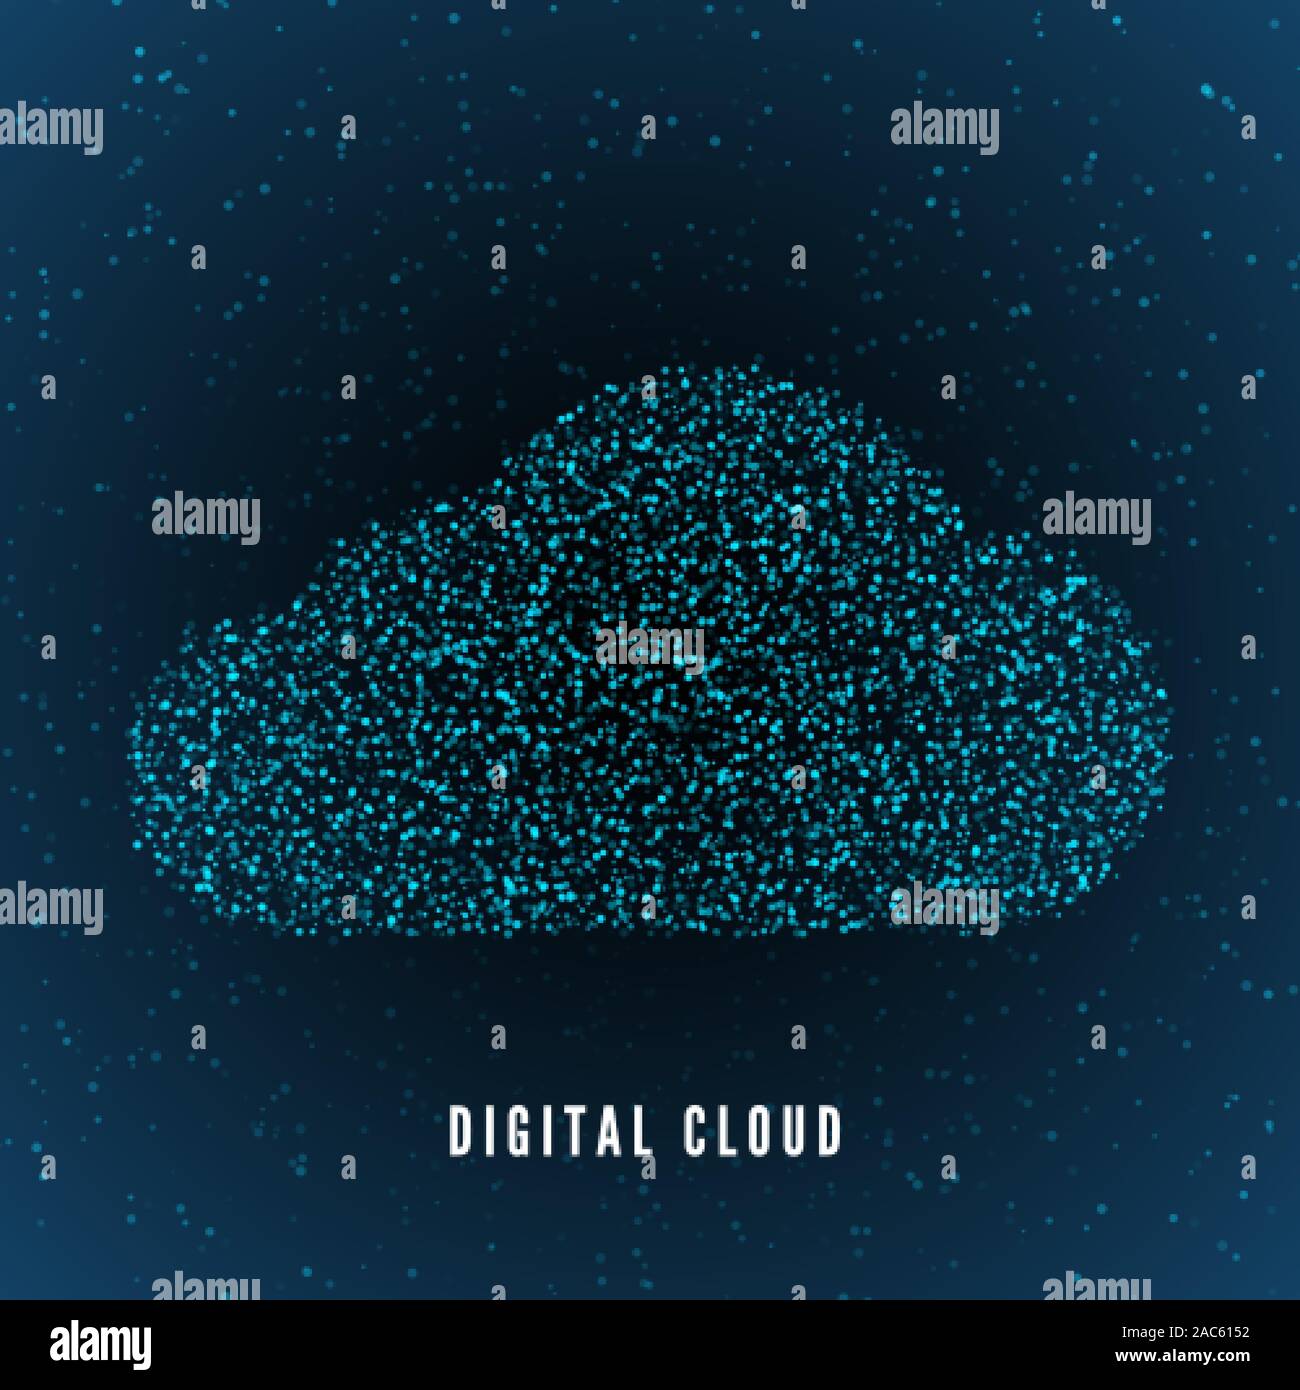 Digital cloud. Global structure of data storage. Web or Internet concept. Technology background. Vector Stock Vector